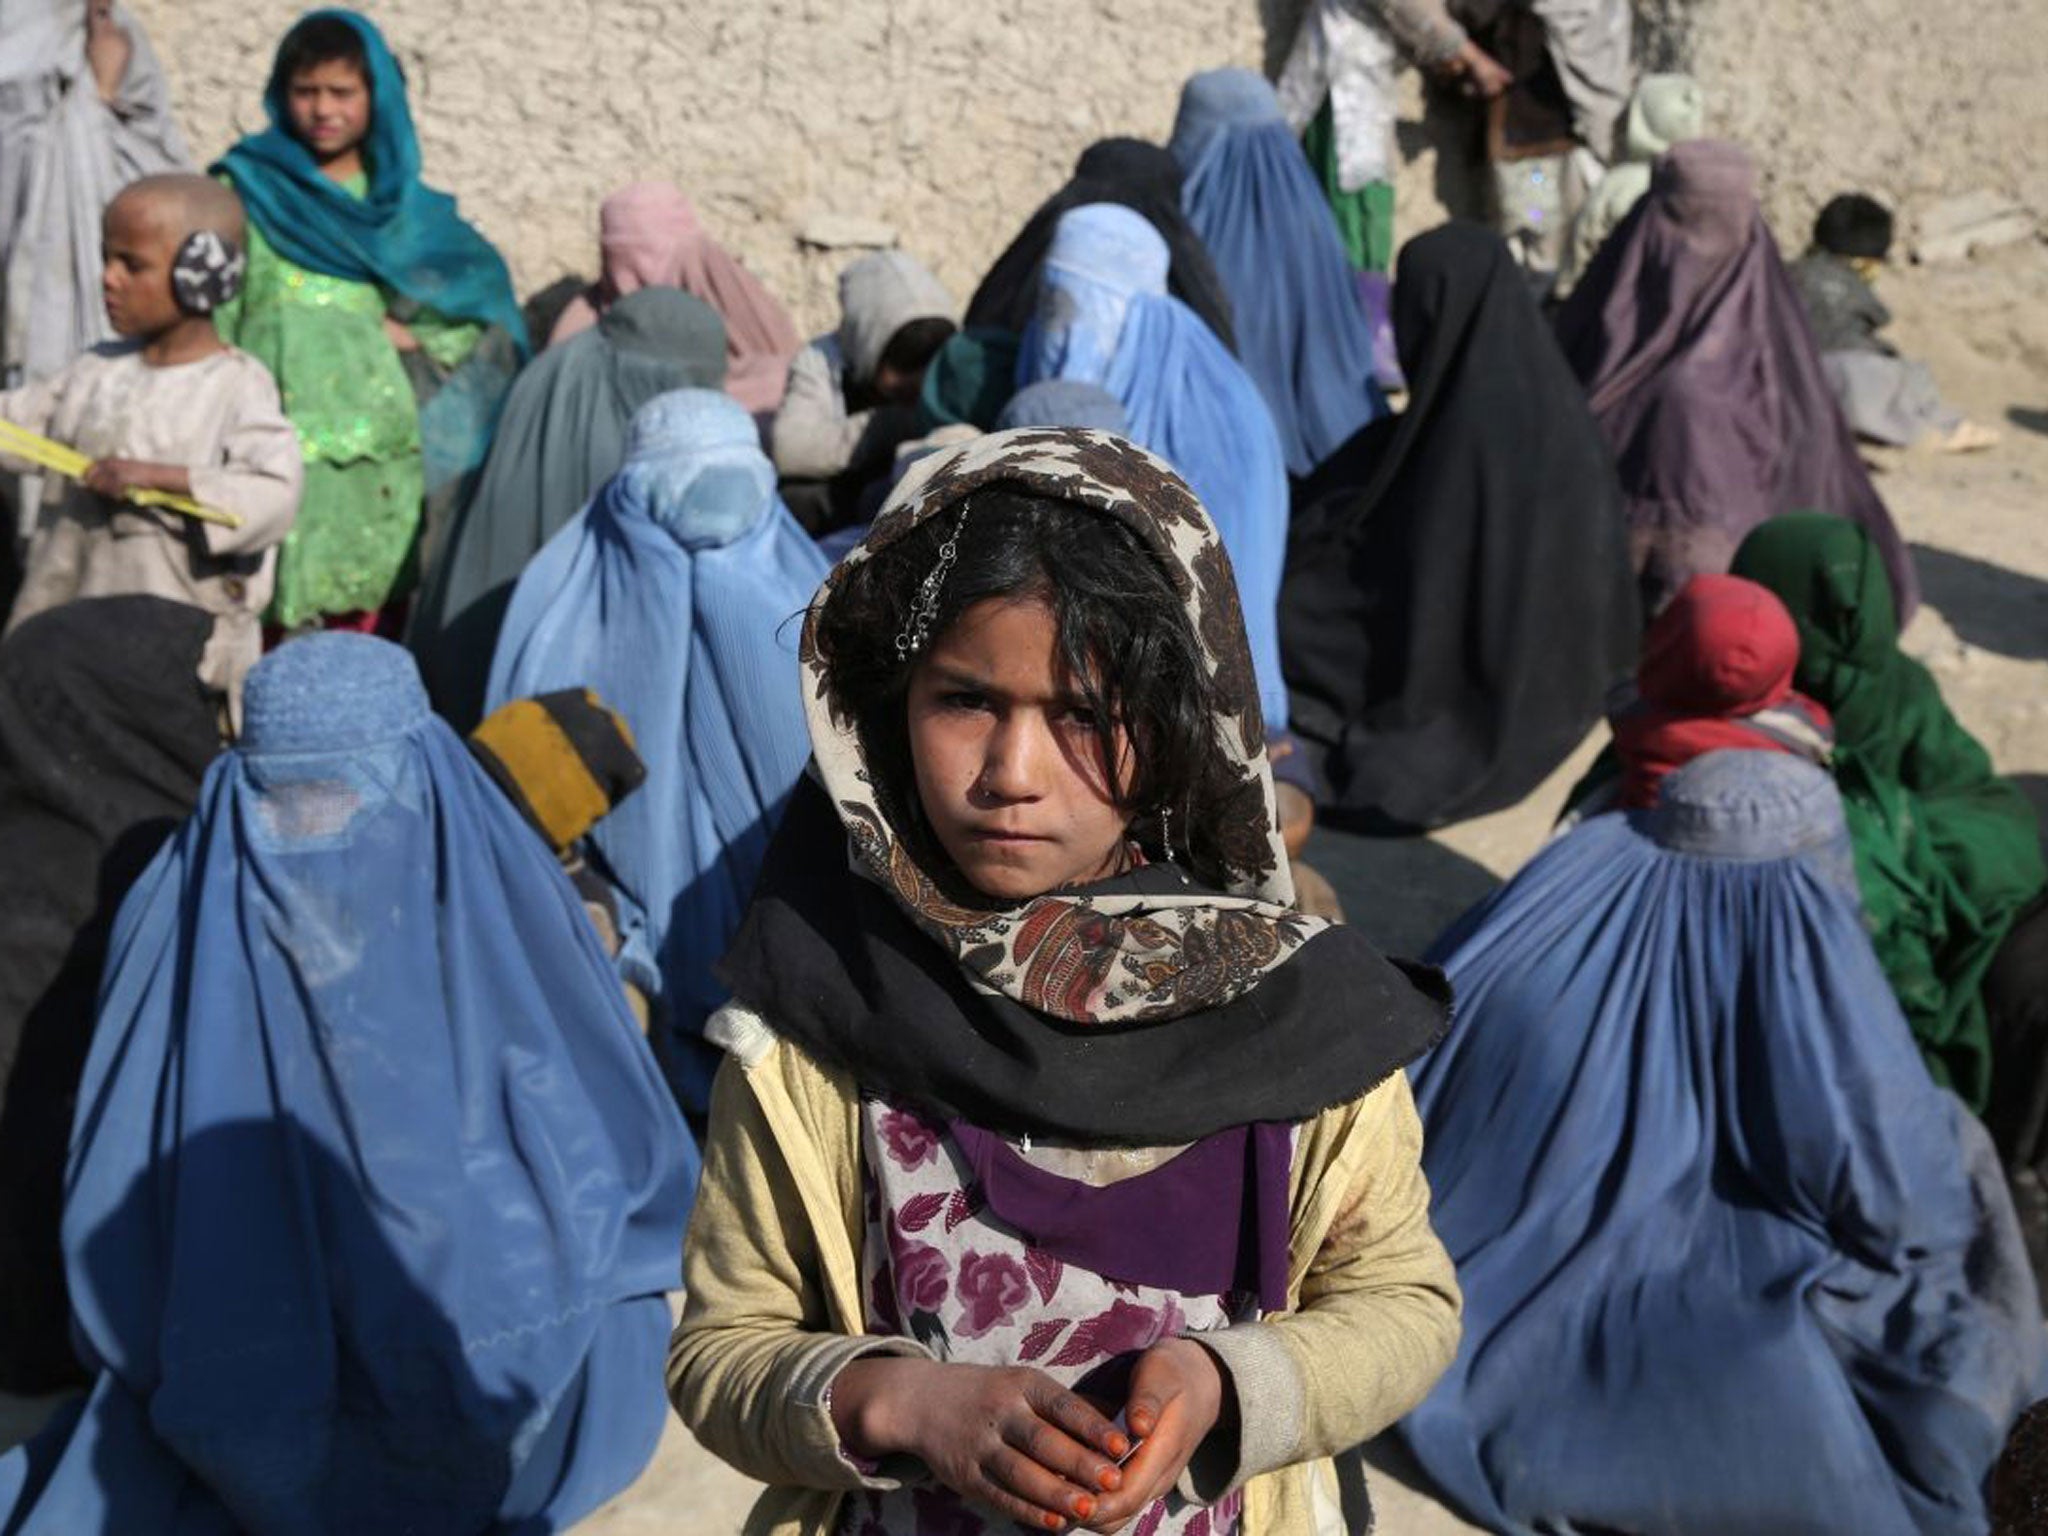 Cold comfort: Afghans wait to receive winter aid in Kabul last weekend